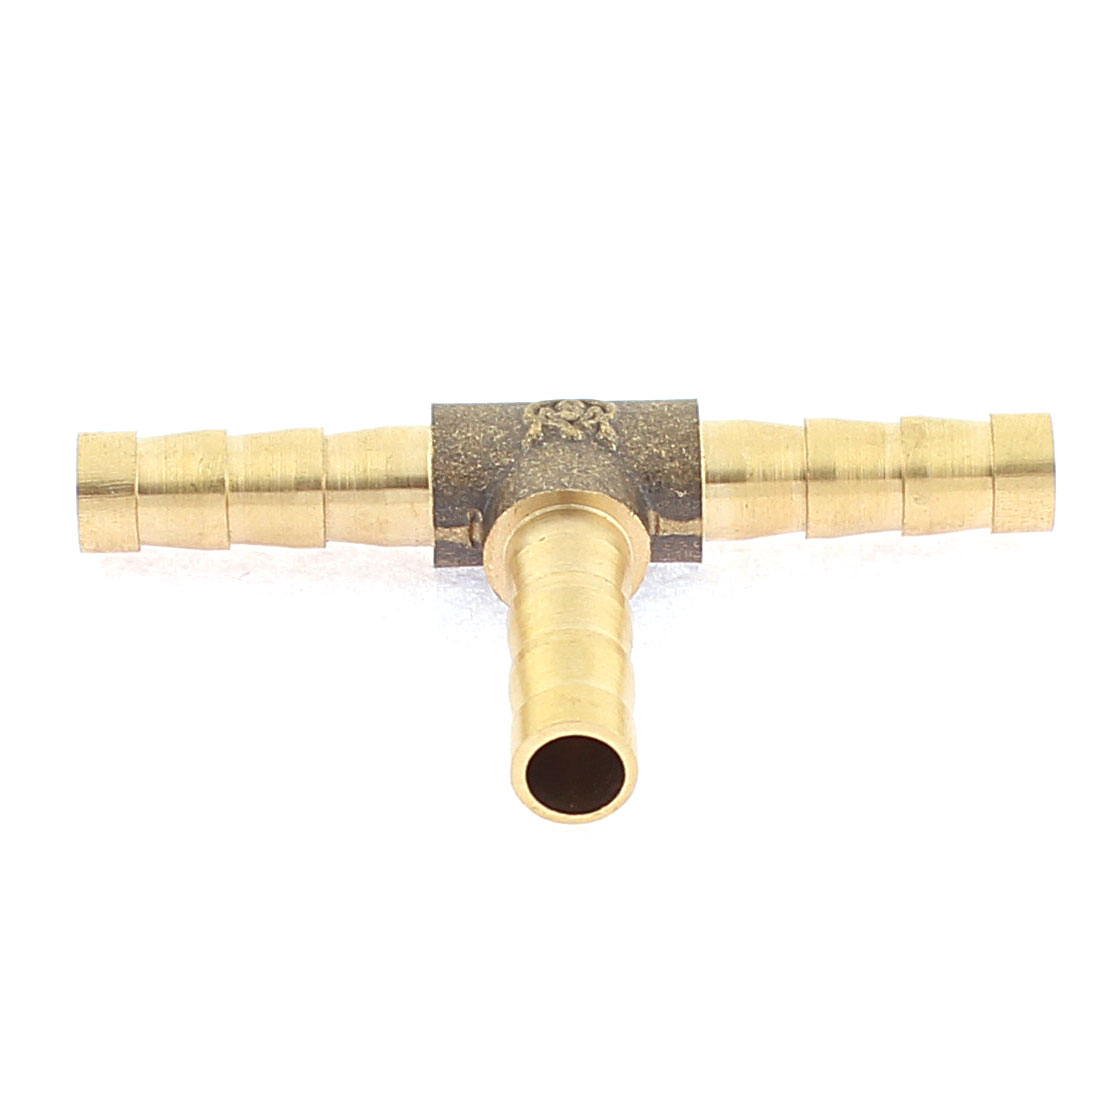 Unique Bargains 6Pcs T-Shape 3 Ways Brass Hose Barb Fitting Adapter Coupler for 6mm Pipe